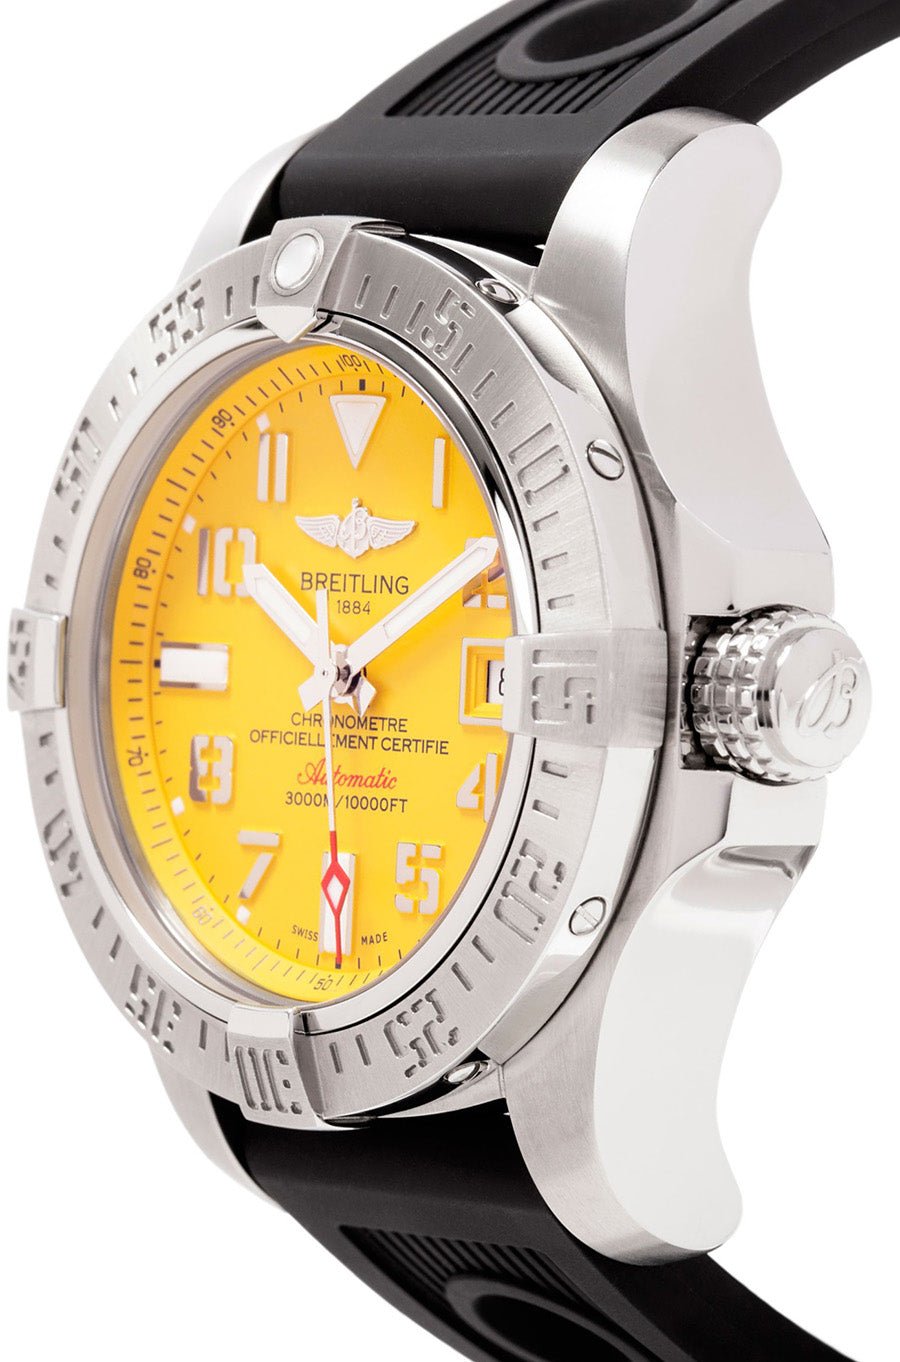 Breitling Avenger II Seawolf Yellow Dial Mens Watch - A1733110/I519/153S